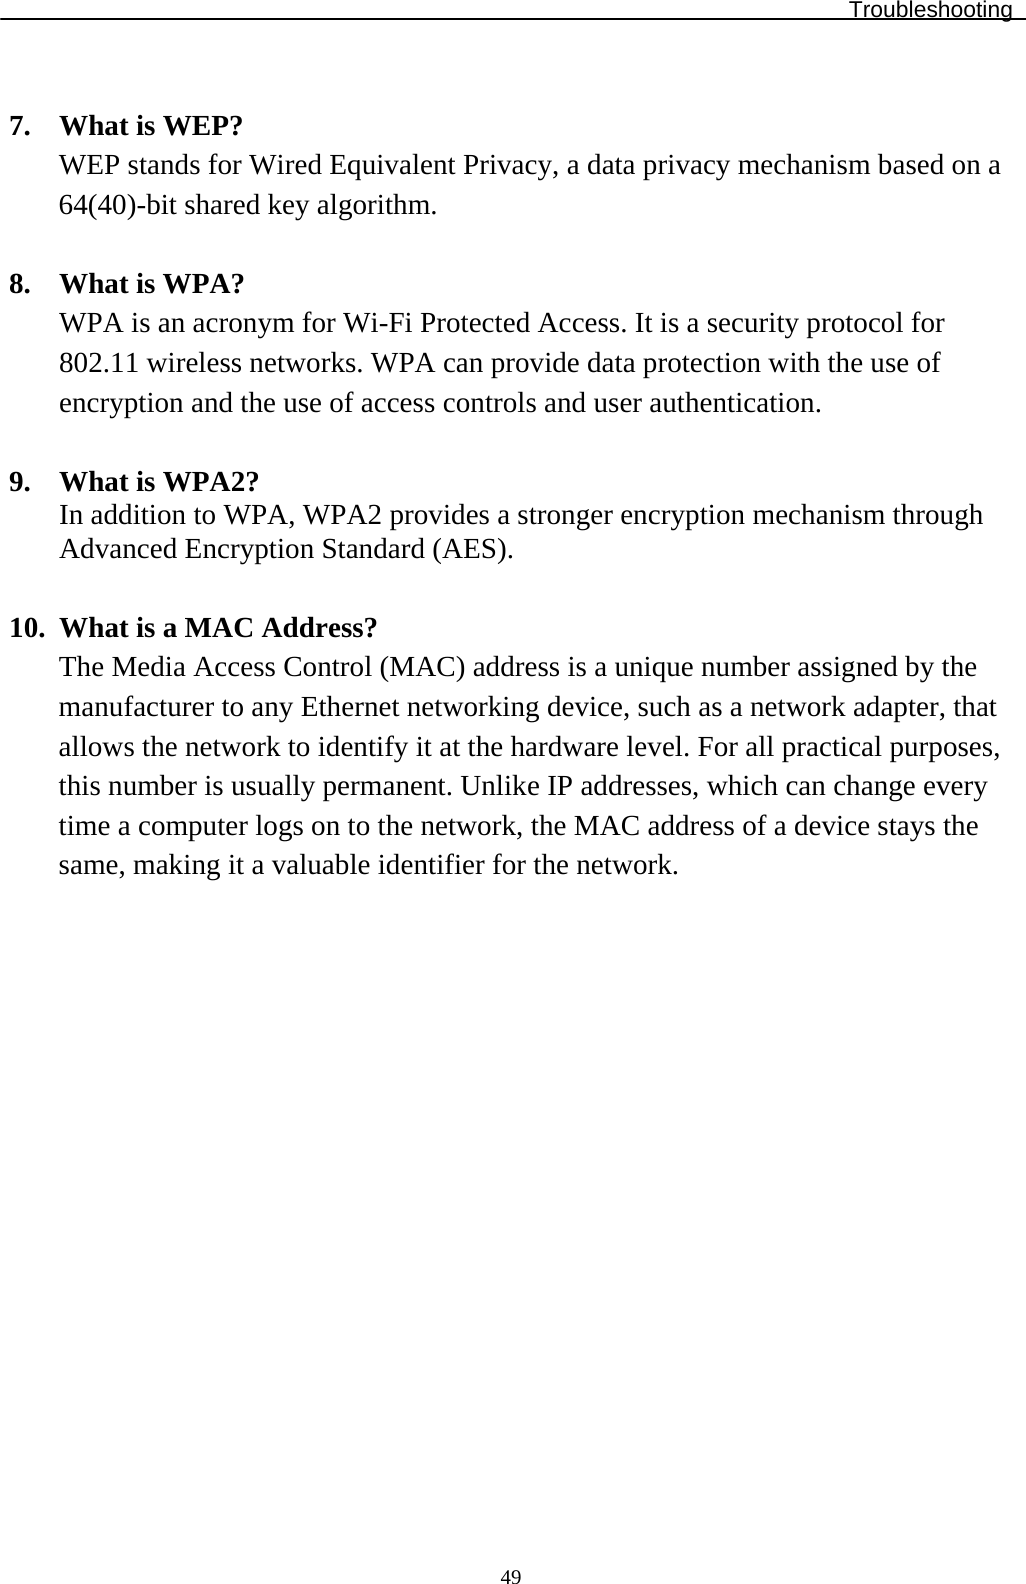 Troubleshooting  49 7. What is WEP? WEP stands for Wired Equivalent Privacy, a data privacy mechanism based on a 64(40)-bit shared key algorithm.  8. What is WPA? WPA is an acronym for Wi-Fi Protected Access. It is a security protocol for 802.11 wireless networks. WPA can provide data protection with the use of encryption and the use of access controls and user authentication.  9. What is WPA2? In addition to WPA, WPA2 provides a stronger encryption mechanism through Advanced Encryption Standard (AES).  10. What is a MAC Address? The Media Access Control (MAC) address is a unique number assigned by the manufacturer to any Ethernet networking device, such as a network adapter, that allows the network to identify it at the hardware level. For all practical purposes, this number is usually permanent. Unlike IP addresses, which can change every time a computer logs on to the network, the MAC address of a device stays the same, making it a valuable identifier for the network.                